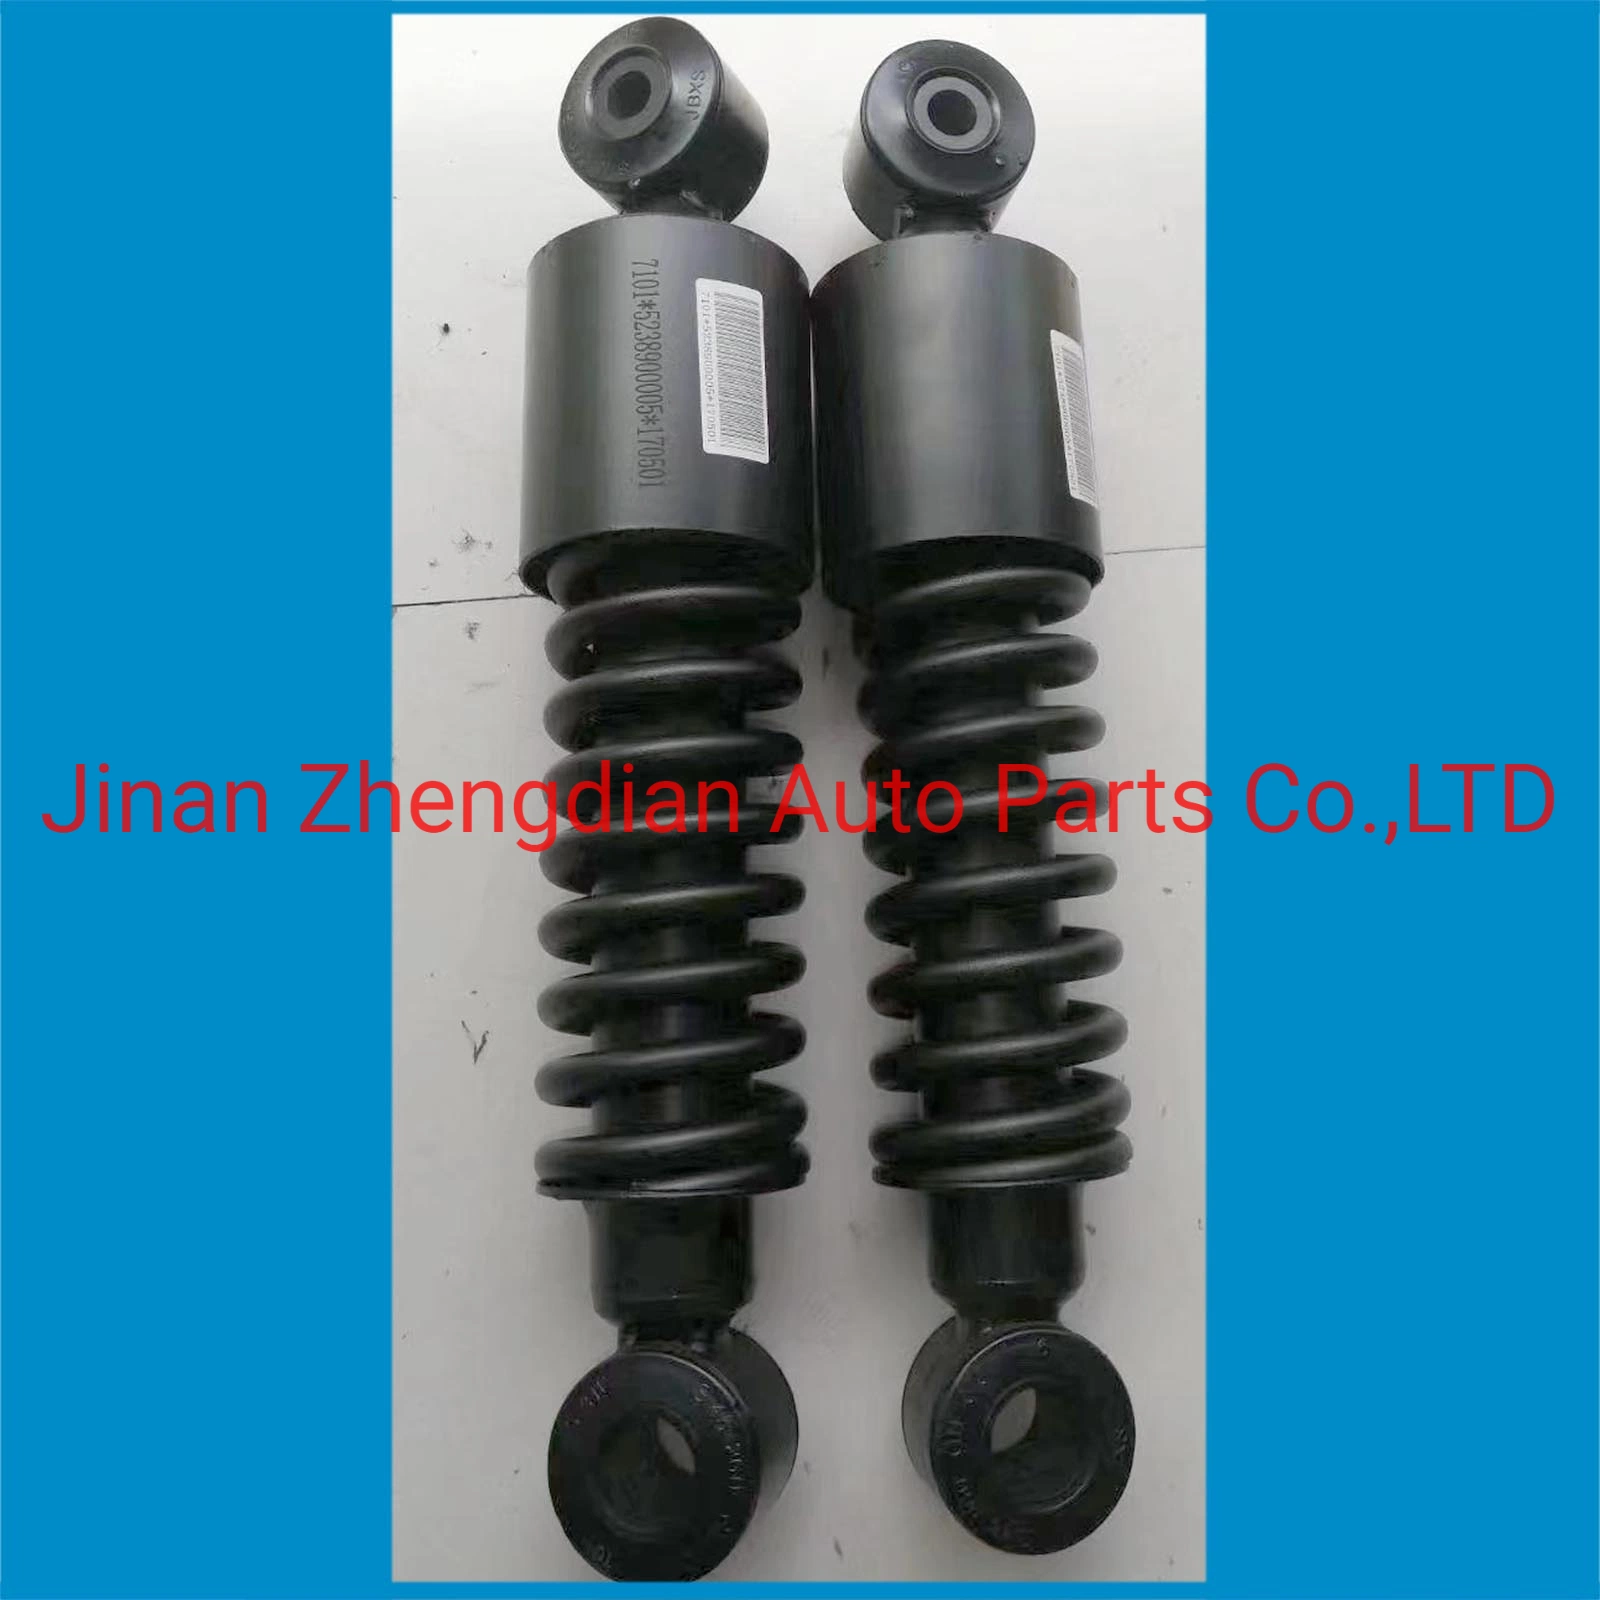 5238900005 5238900105 Auto Rear Suspension Spring Shock Absorber for Beiben North Benz Sinotruk HOWO Shacman FAW Foton Auman Hongyan Camc JAC Truck Spare Parts